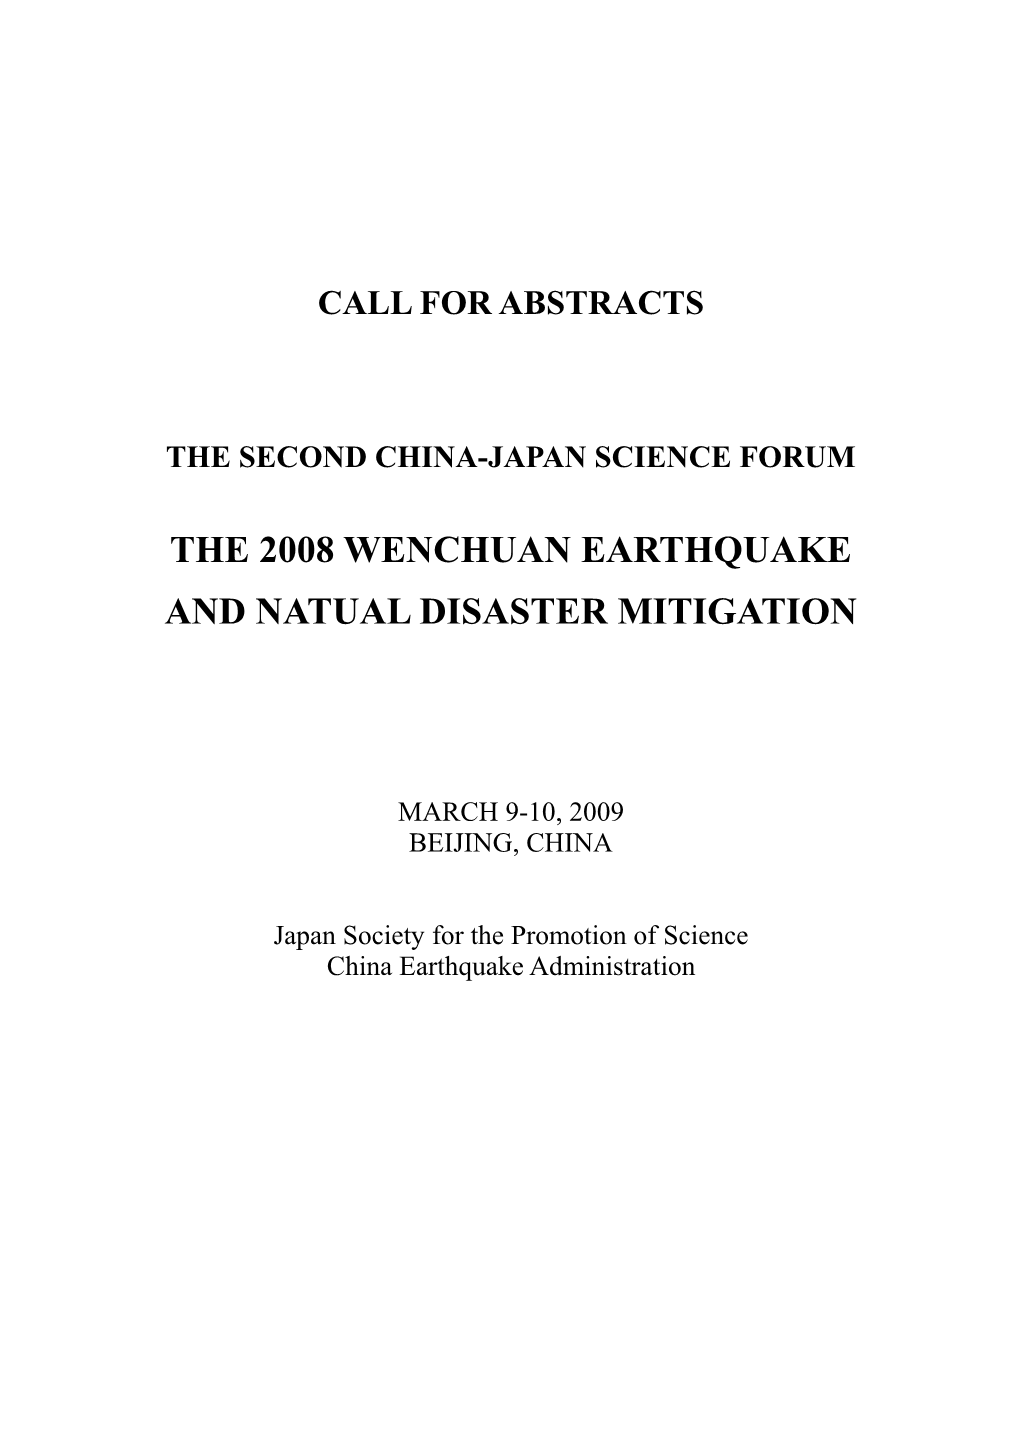 The Second China-Japan Science Forum